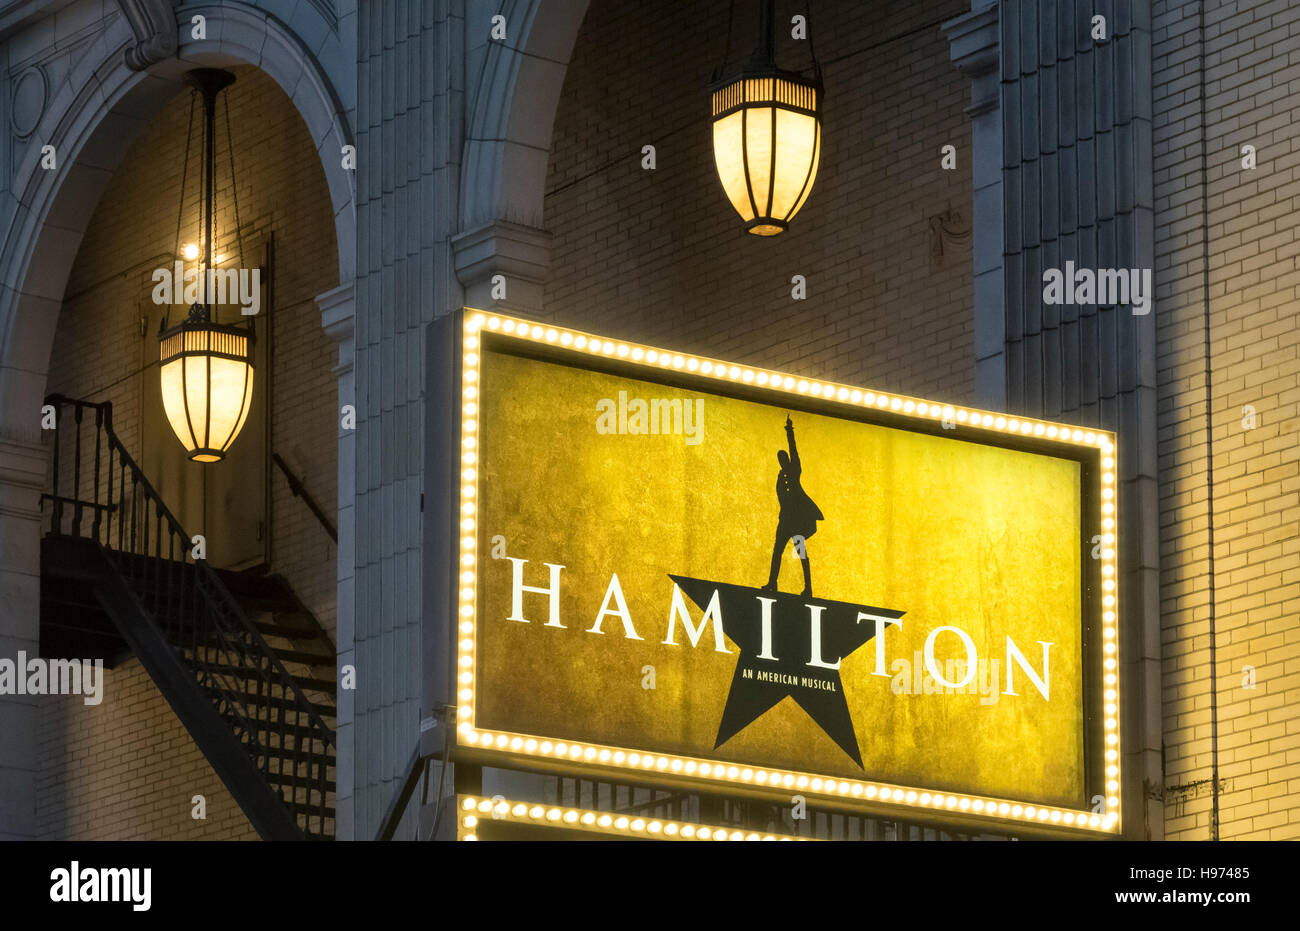 Hamilton, An American Musical, at the Richard Rodgers Theatre in NYC Stock Photo